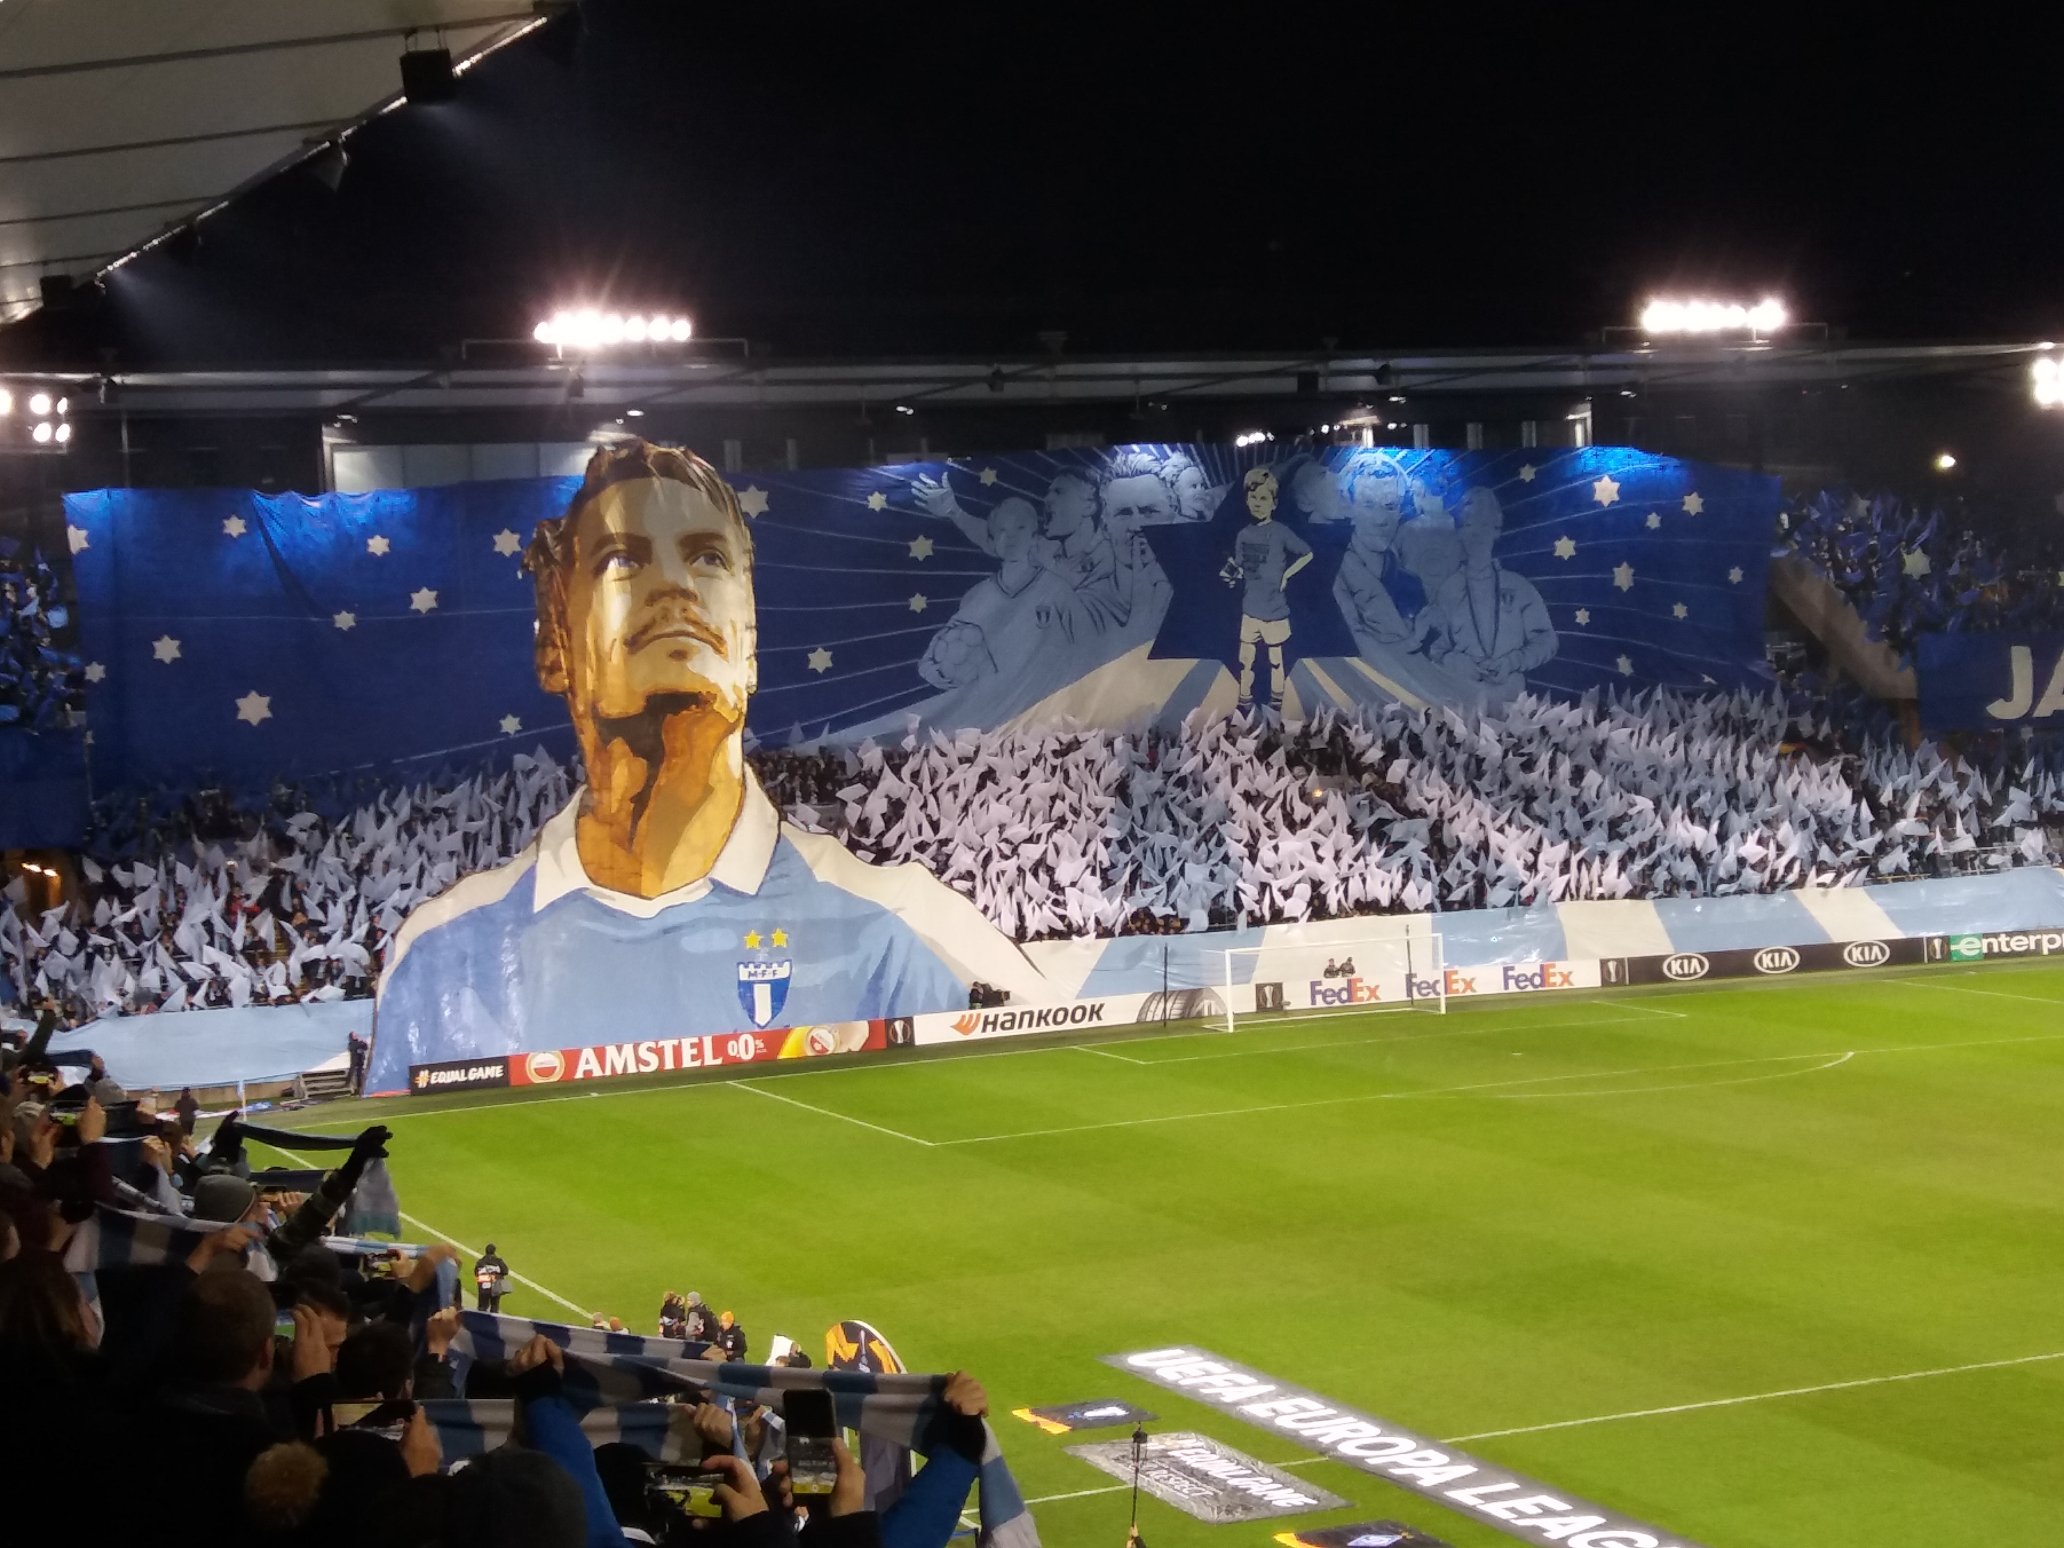 Per-Gunnar Nilsson on Twitter: "Impressive tifo from the Malmö fans as they say goodbye to Markus Rosenberg. #MFF #UEL 1-0 in the 2nd https://t.co/9gj9KSHYYO" /